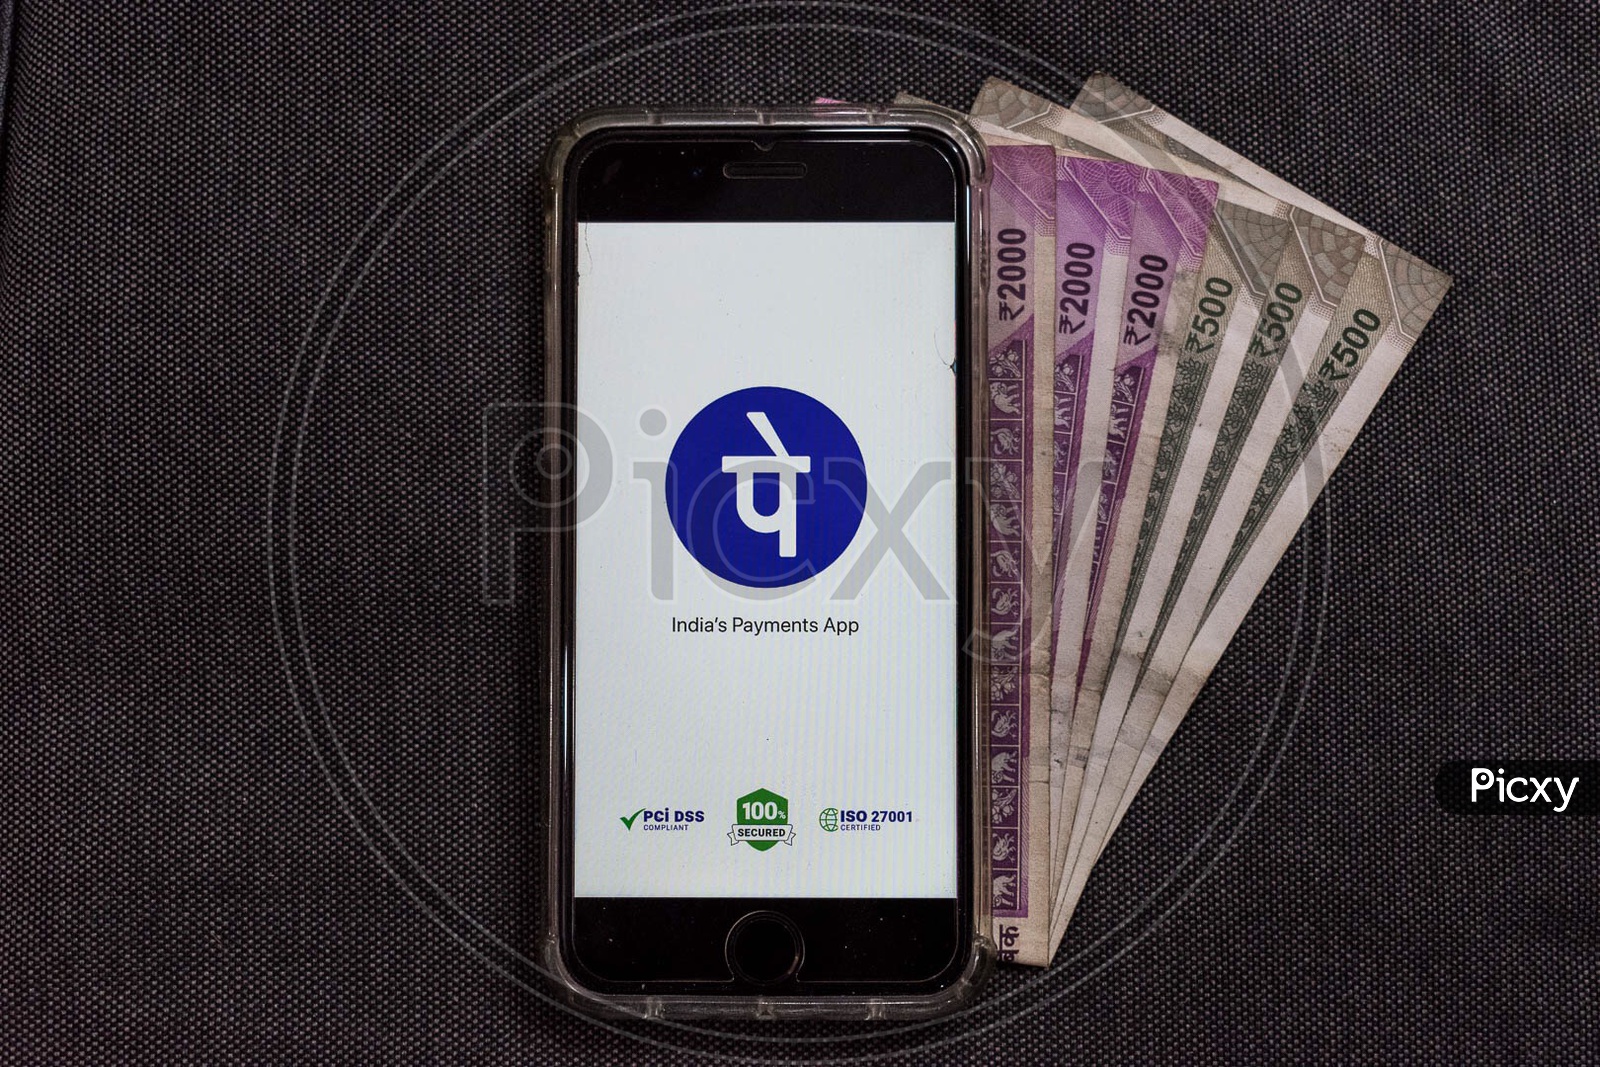 PhonePe online payments app for mobile